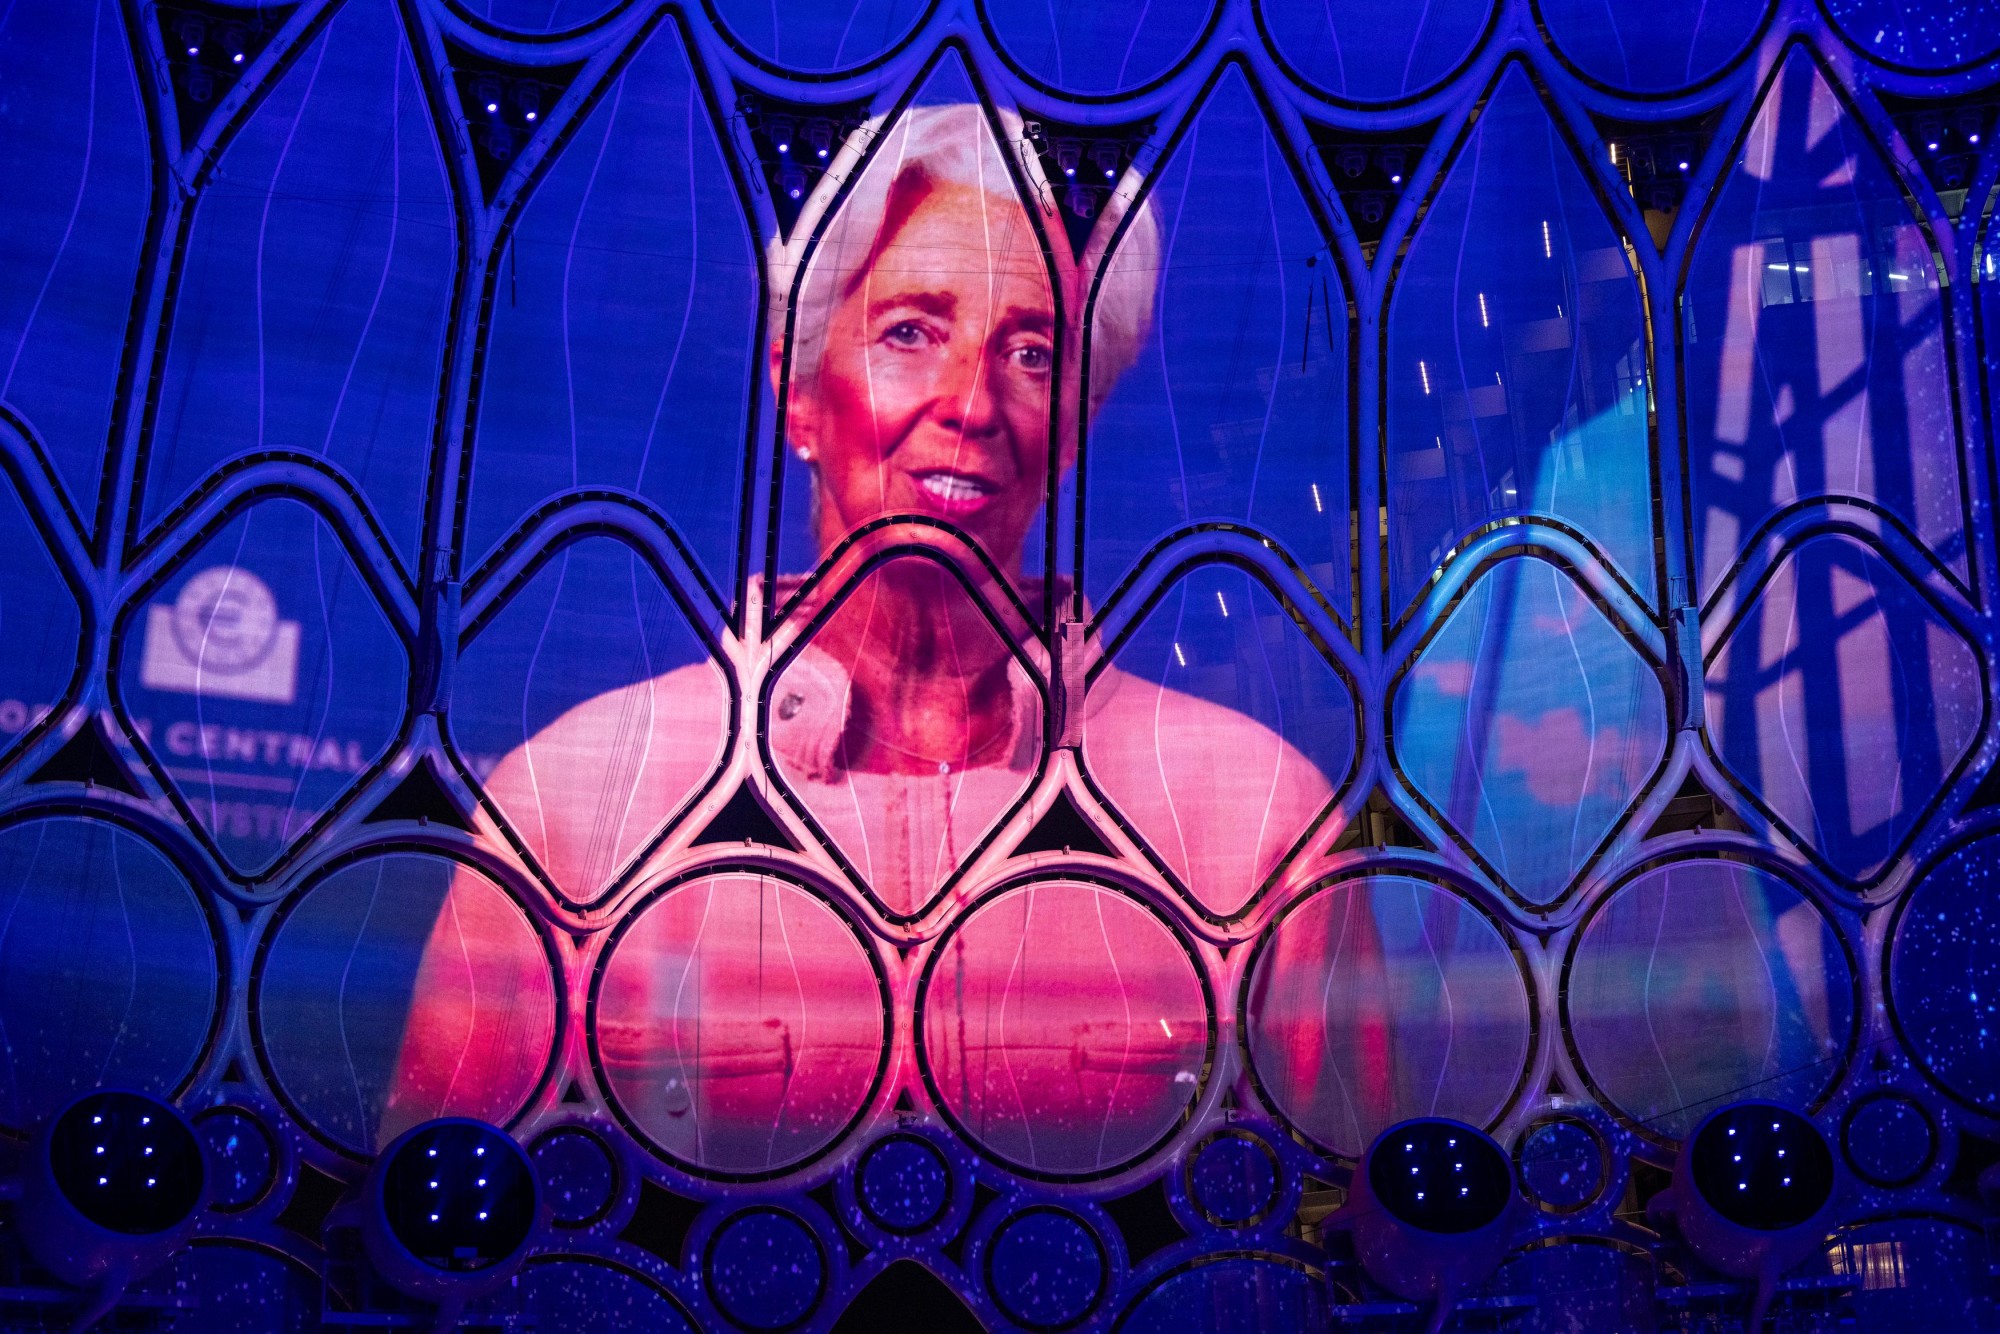 Projection of Christine Lagarde, President of the European Central Bank during the International Women’s Day Celebration at Al Wasl m60619